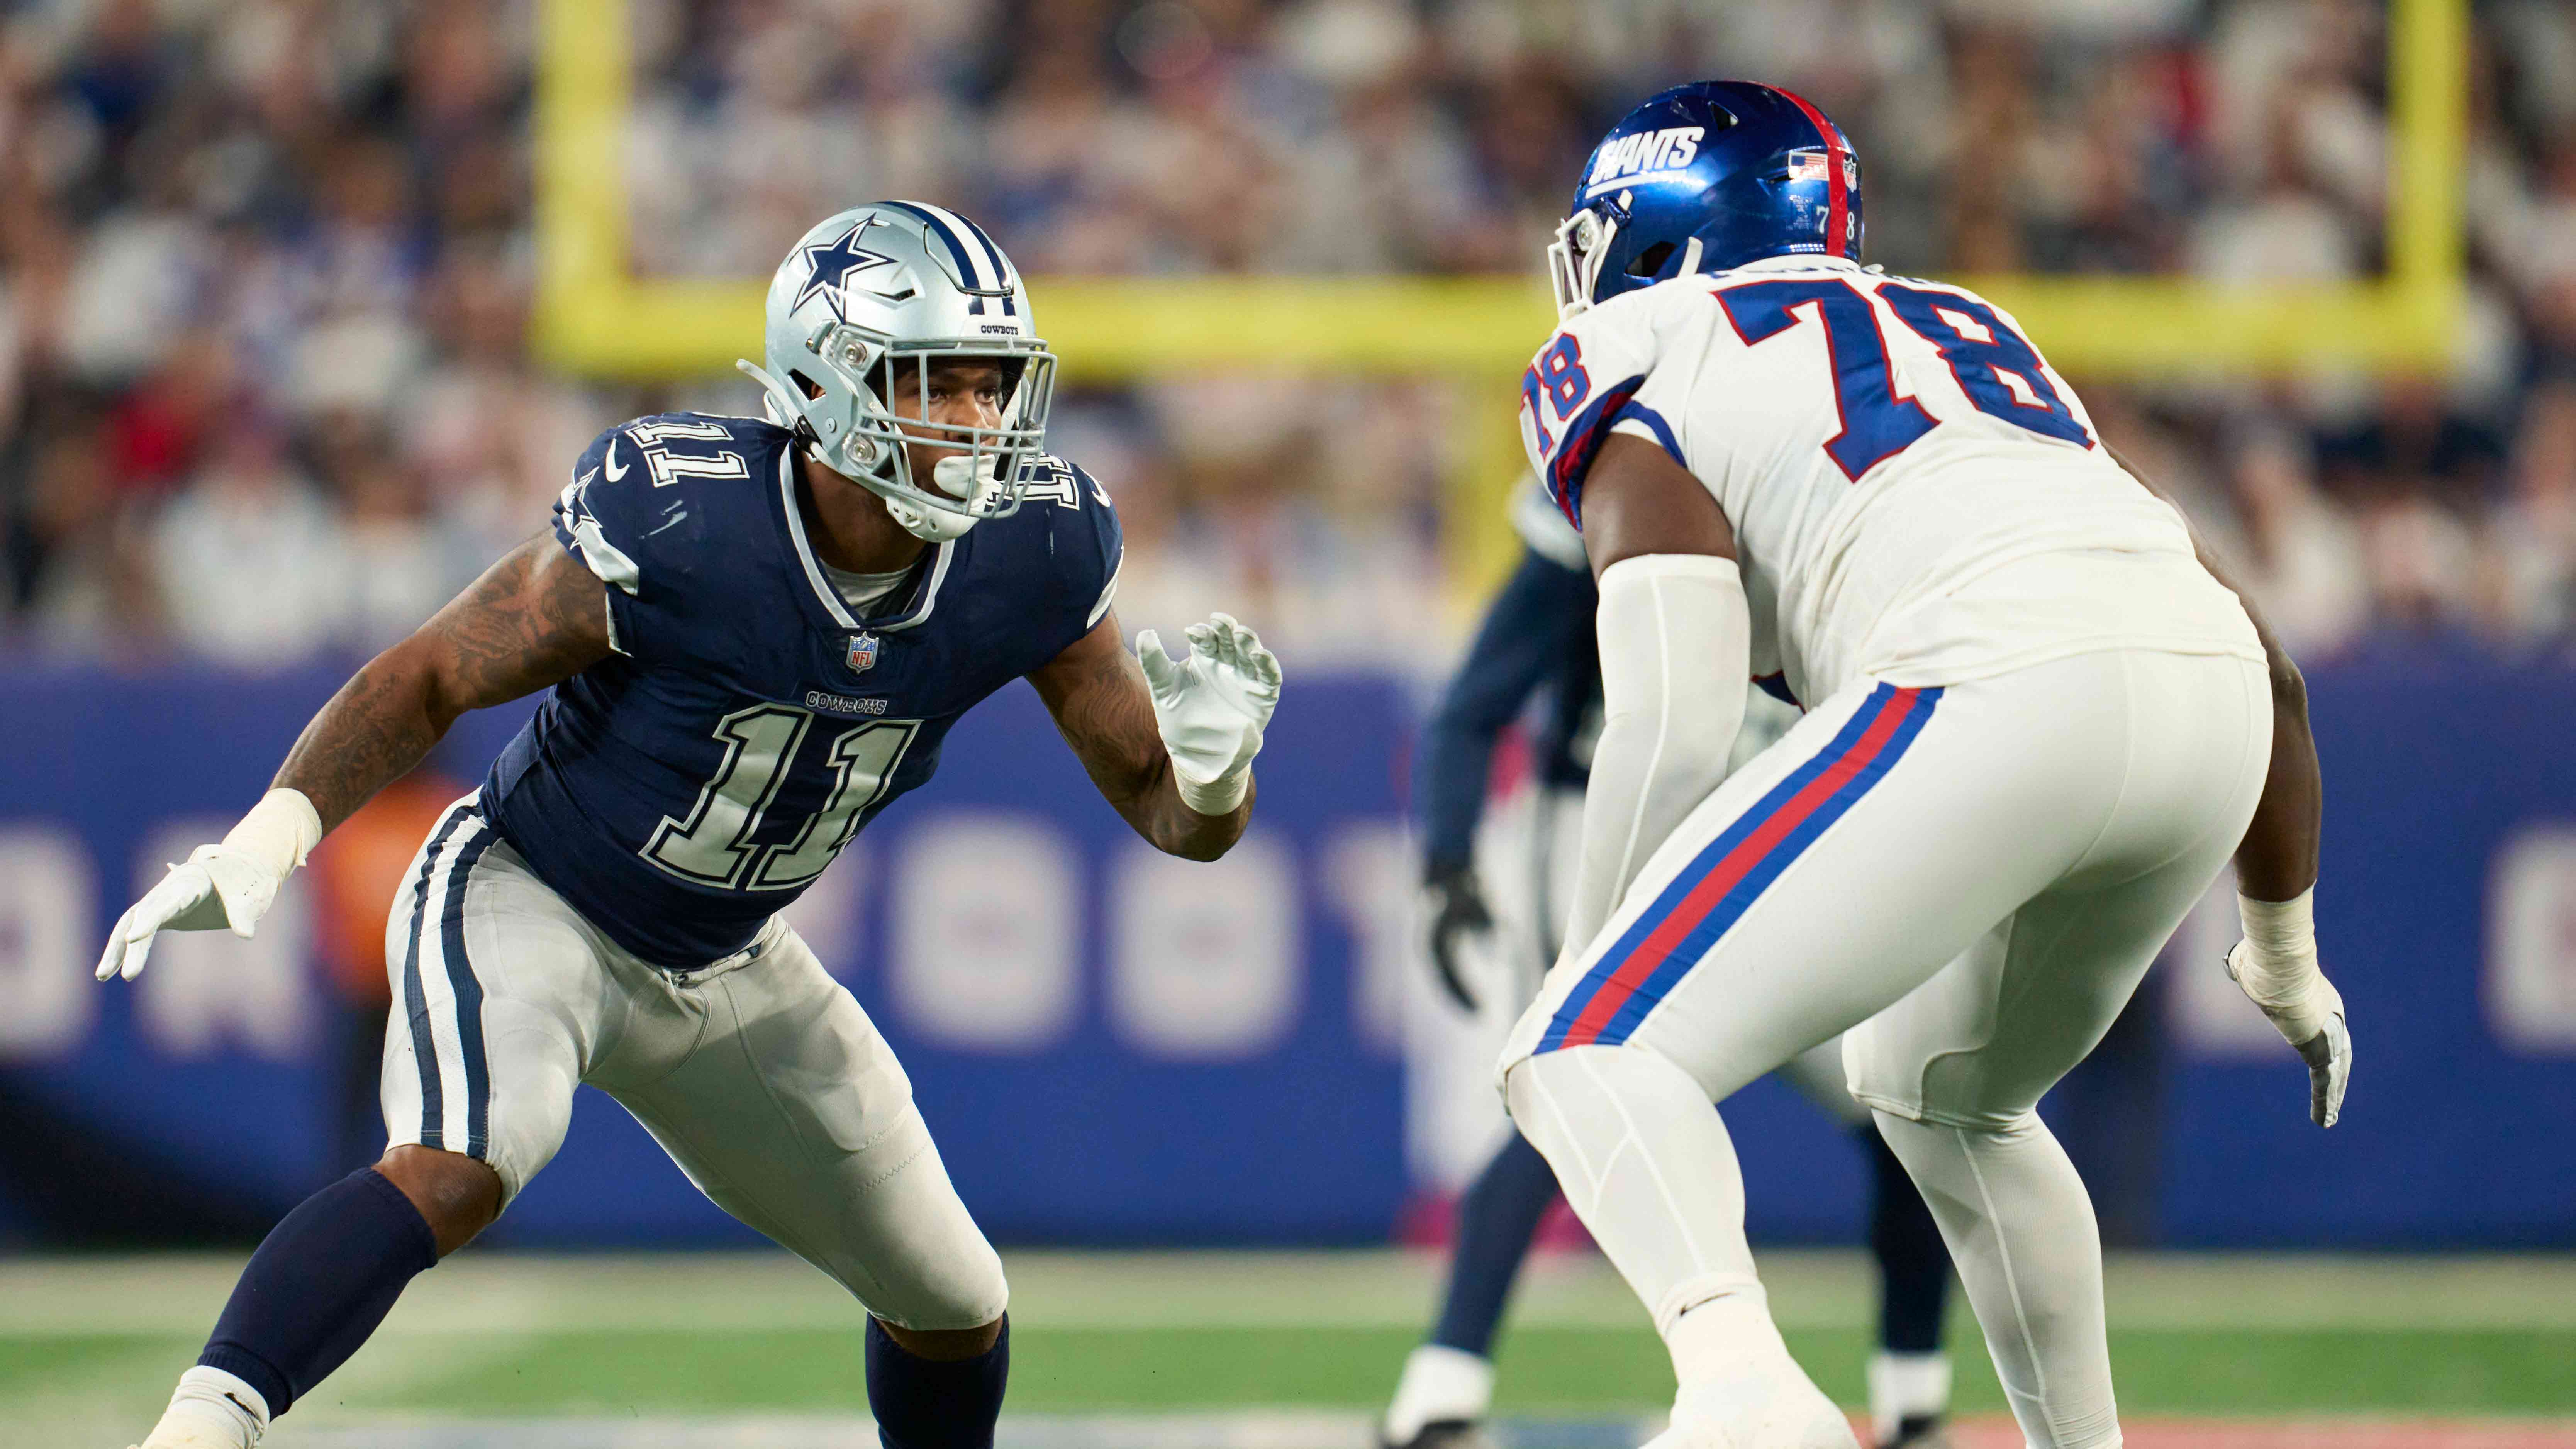 New York Giants vs. Dallas Cowboys: How to watch NFL Week 5